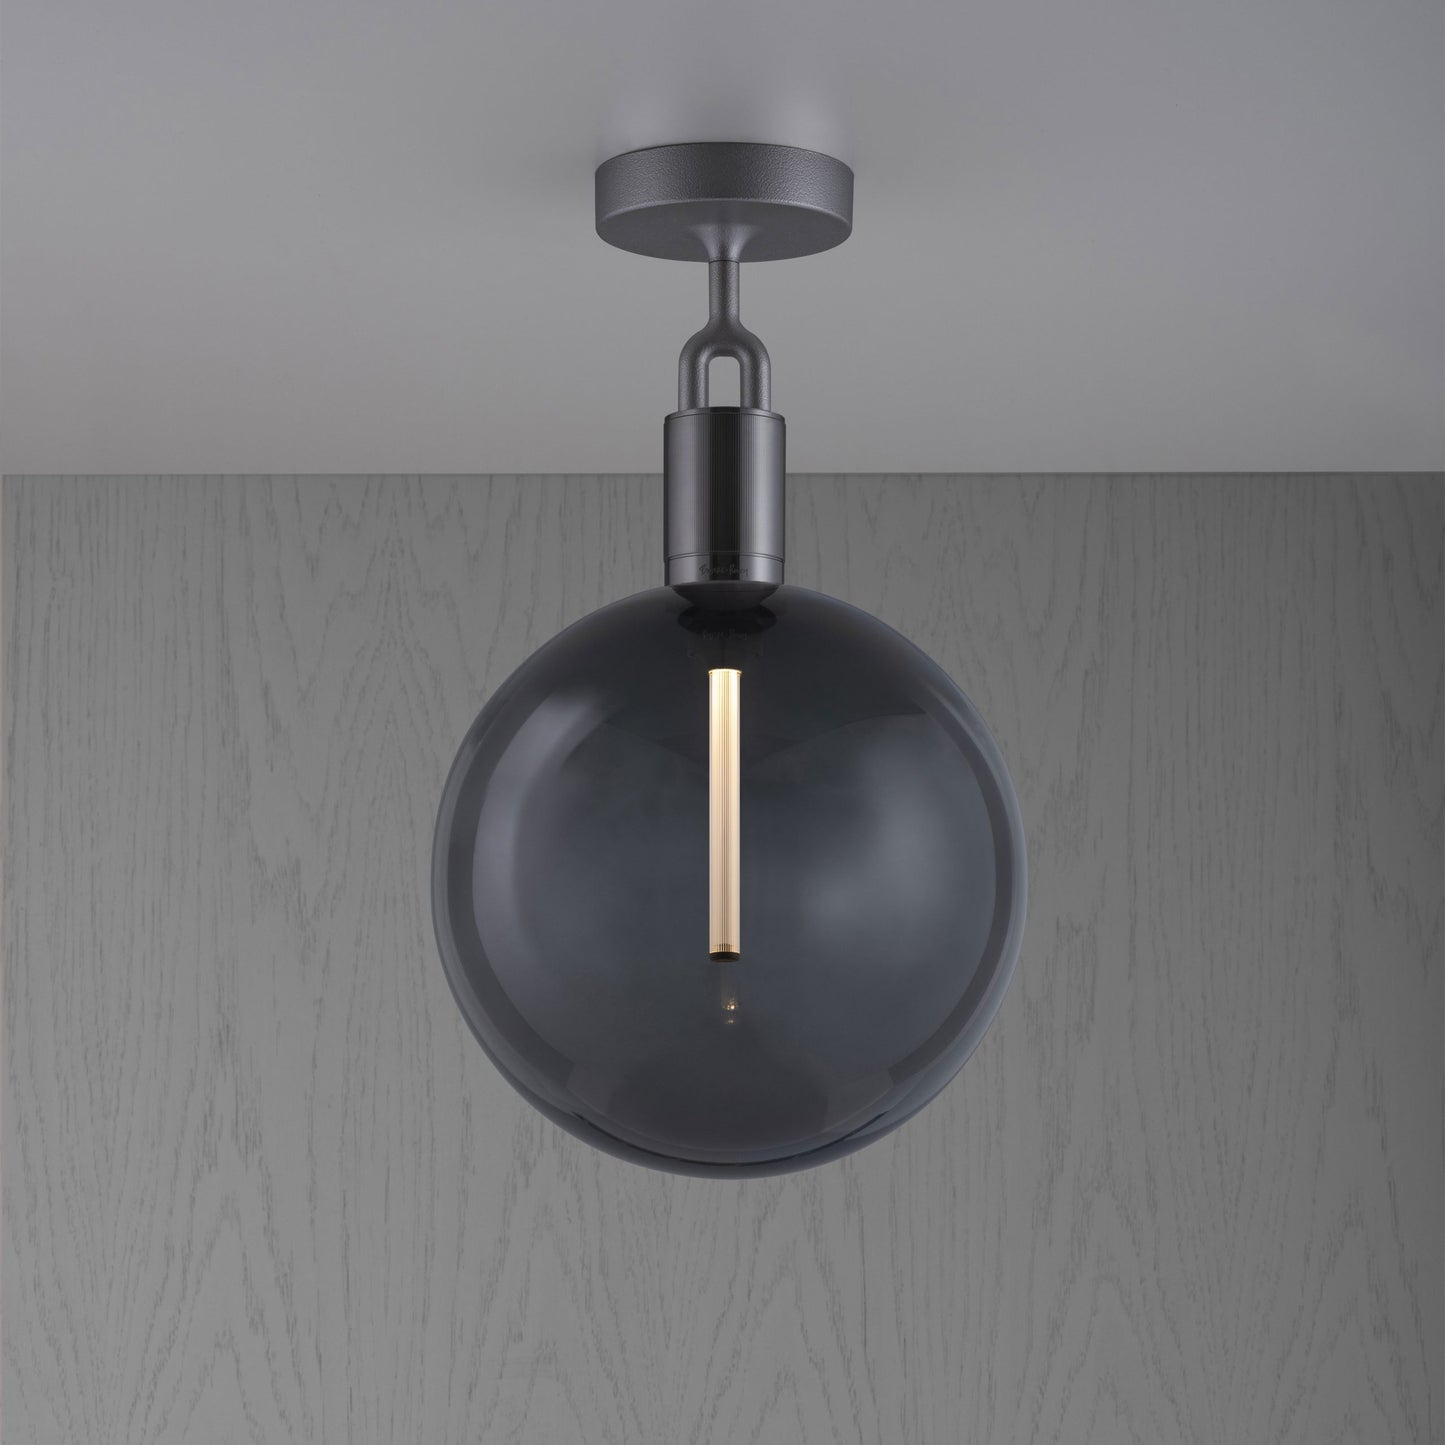 Forked Ceiling Light / Globe / Smoked / Large Gun metal, front view.